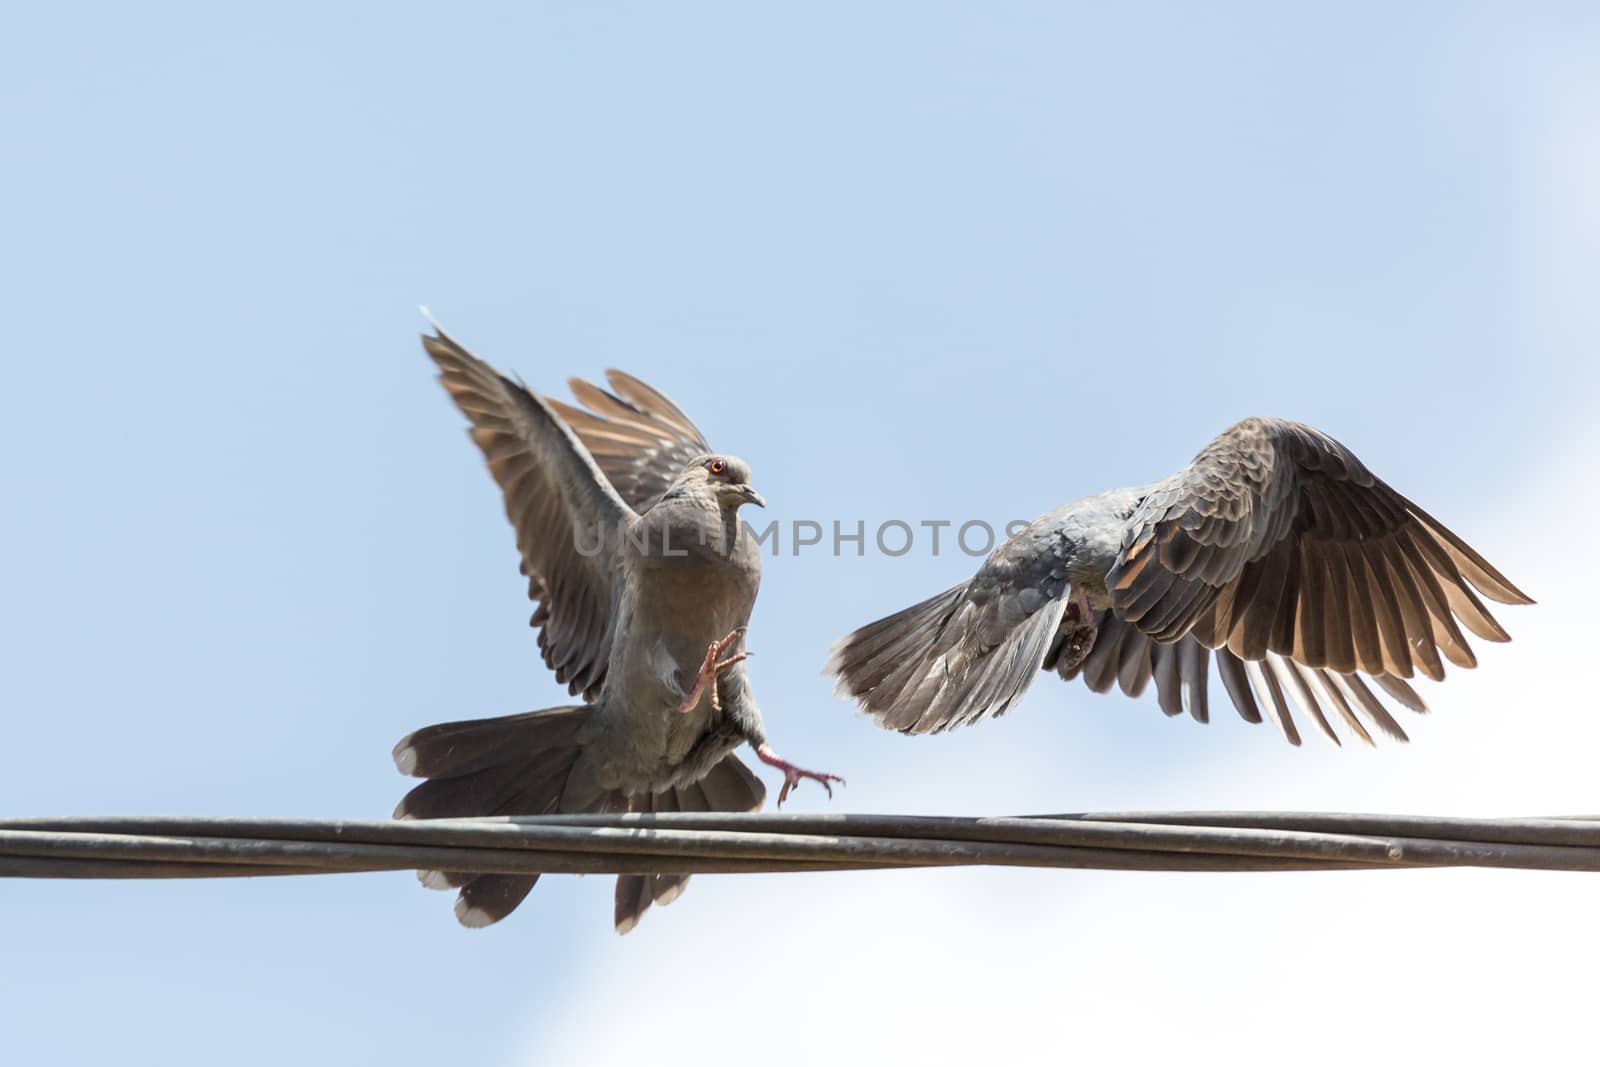 Two pigeons fighting over an electric line which they use as a place to sit